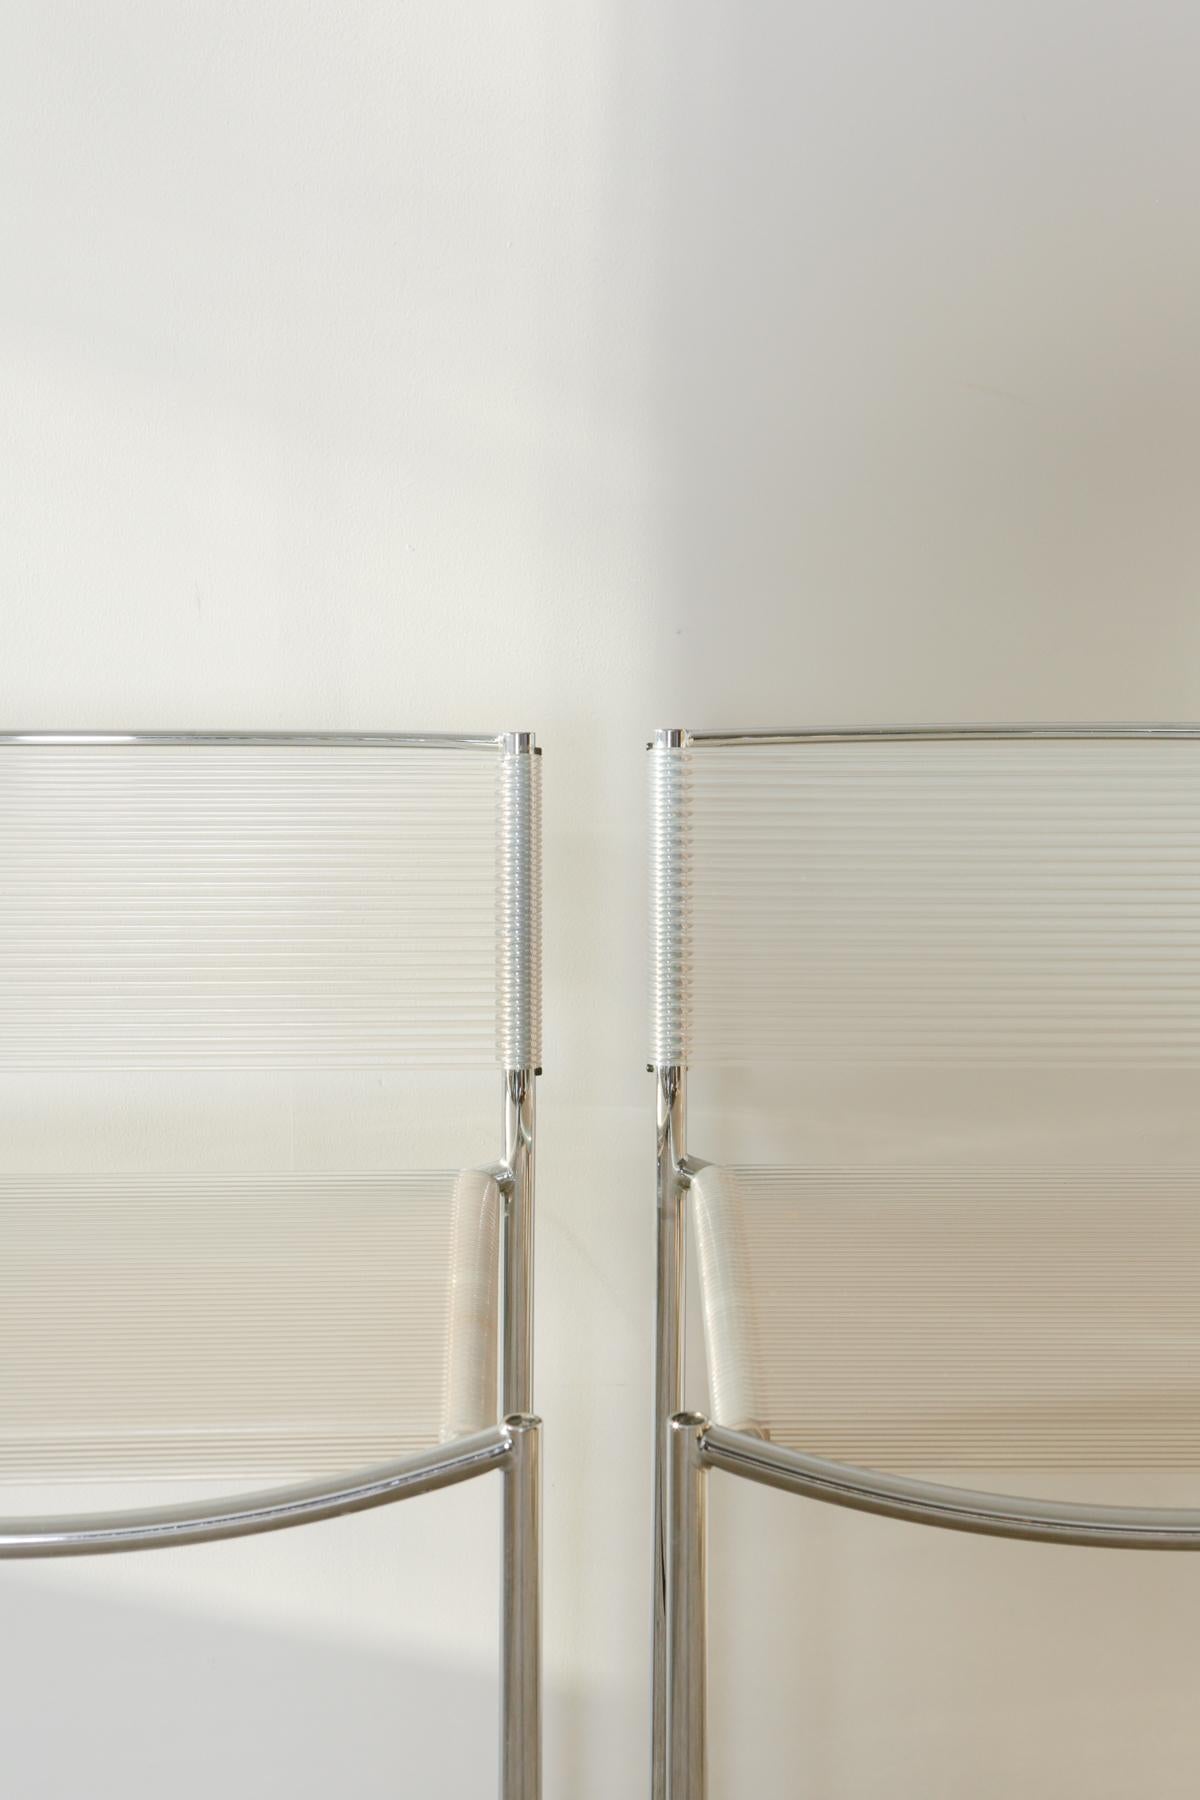 Spaghetti stools, designed by Giandomenico Belotti for Alias in circa 1980s. Spaghetti is the first Alias chair to appear in the MoMA collection of New York. The frame is bright silver enameled steel, while the backrest and the seater is transparent